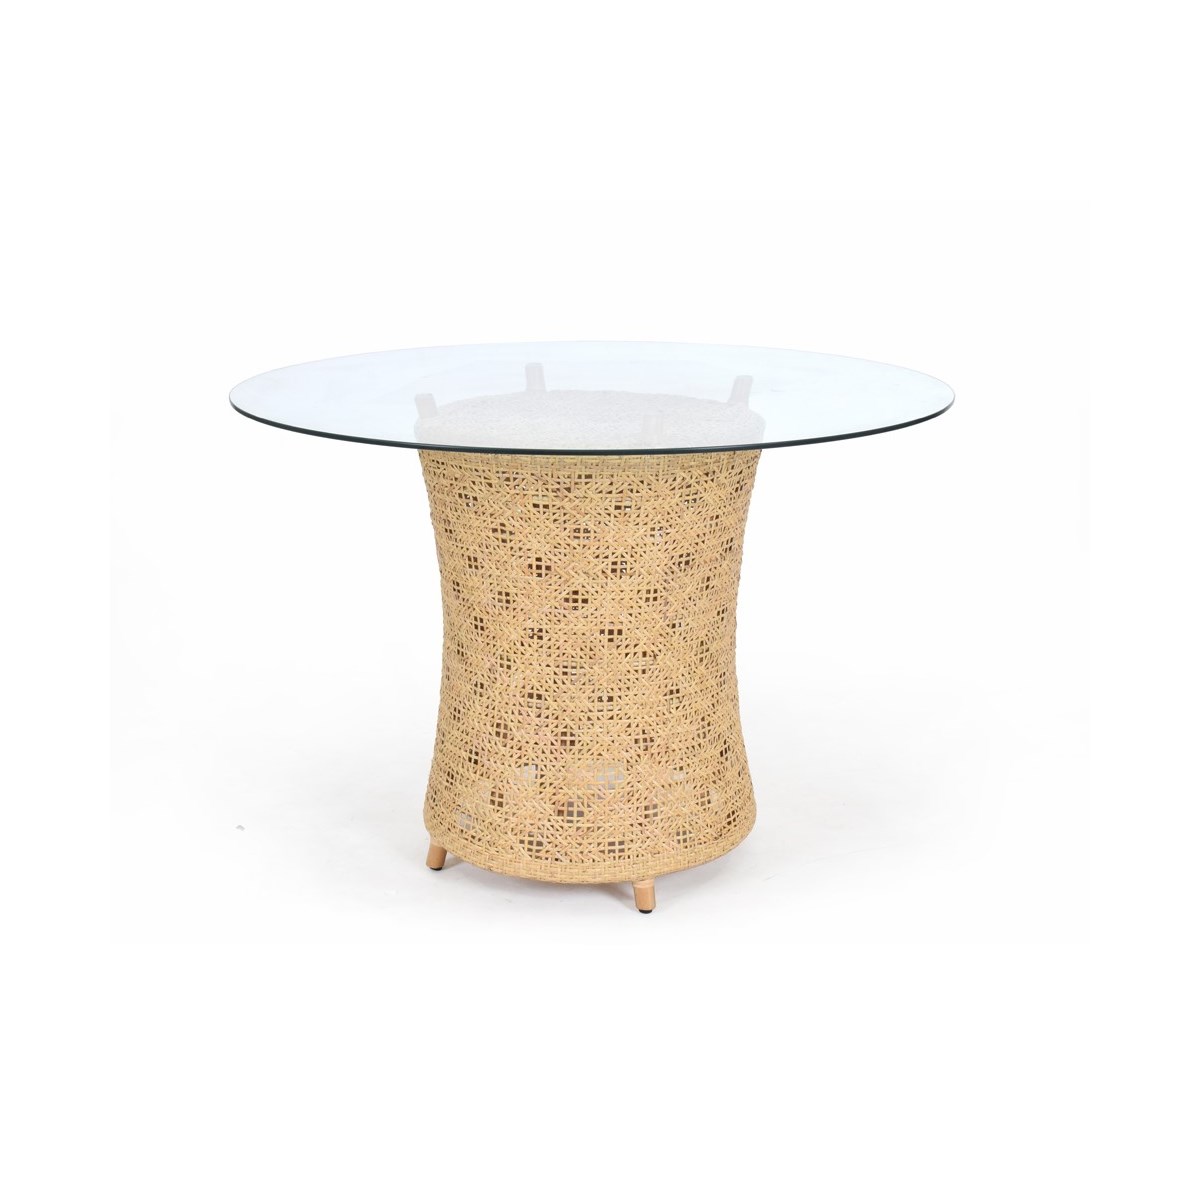 Ava Table Base Woven Rattan Table Base Color - Natural (Glass Top NOT Included) CLOSE-OUT - 50